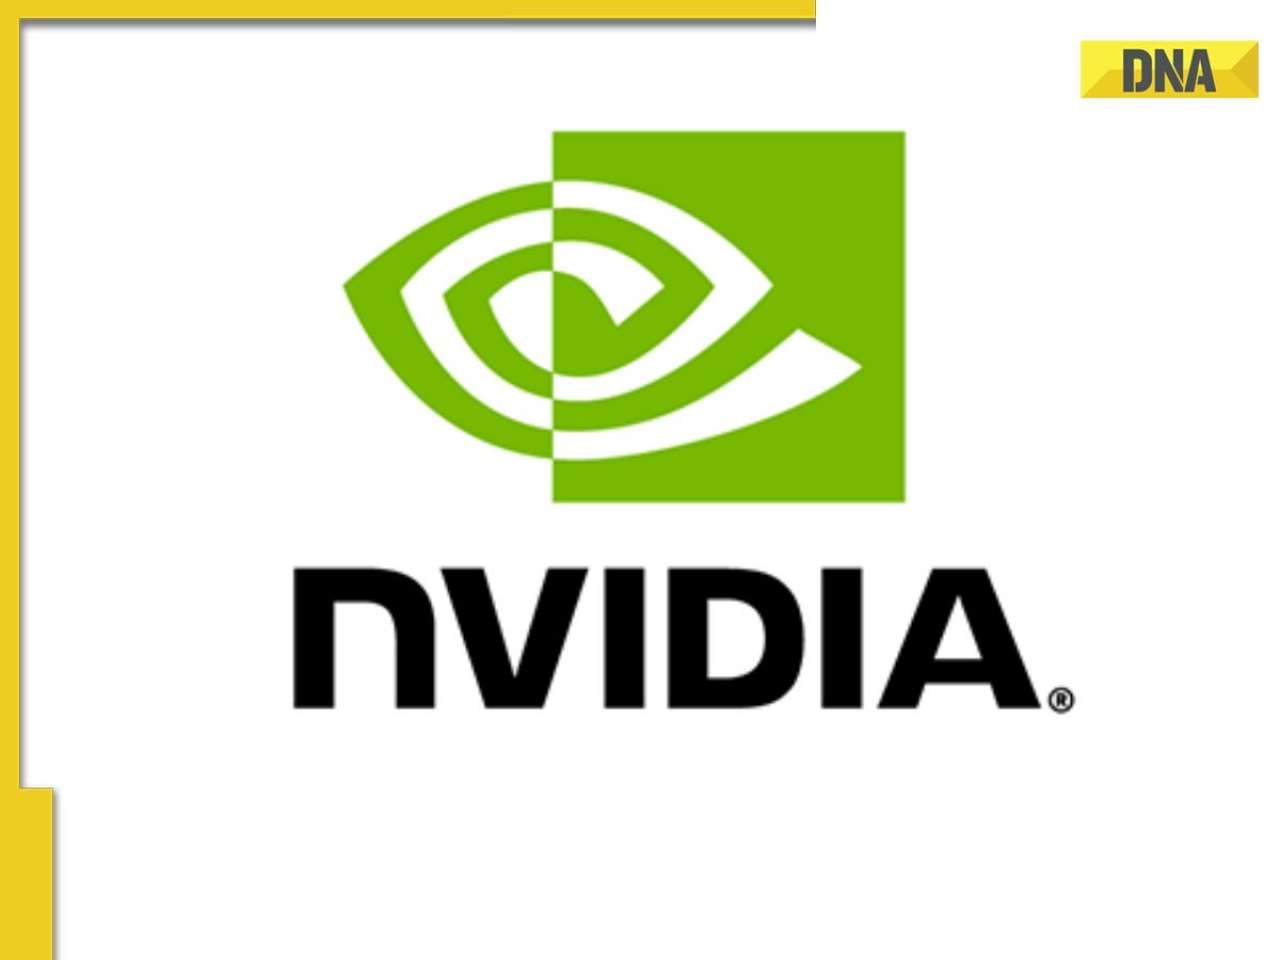 Apple overthrown by Rs 25025160 crore Nvidia, it is now world’s second most…